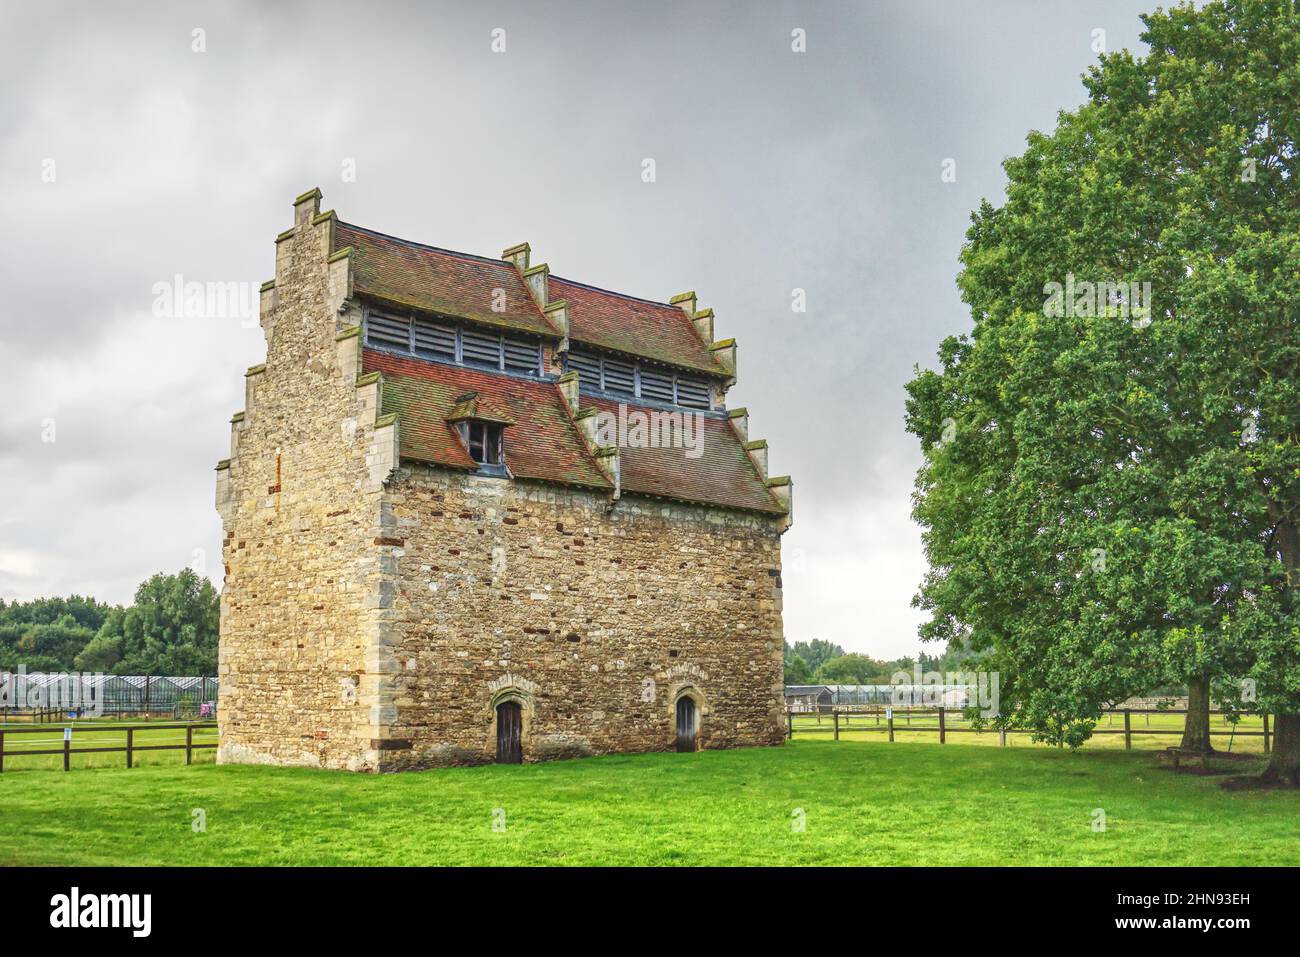 The Dovecote at Willington, Bedfordshire, Angleterre, Royaume-Uni Banque D'Images